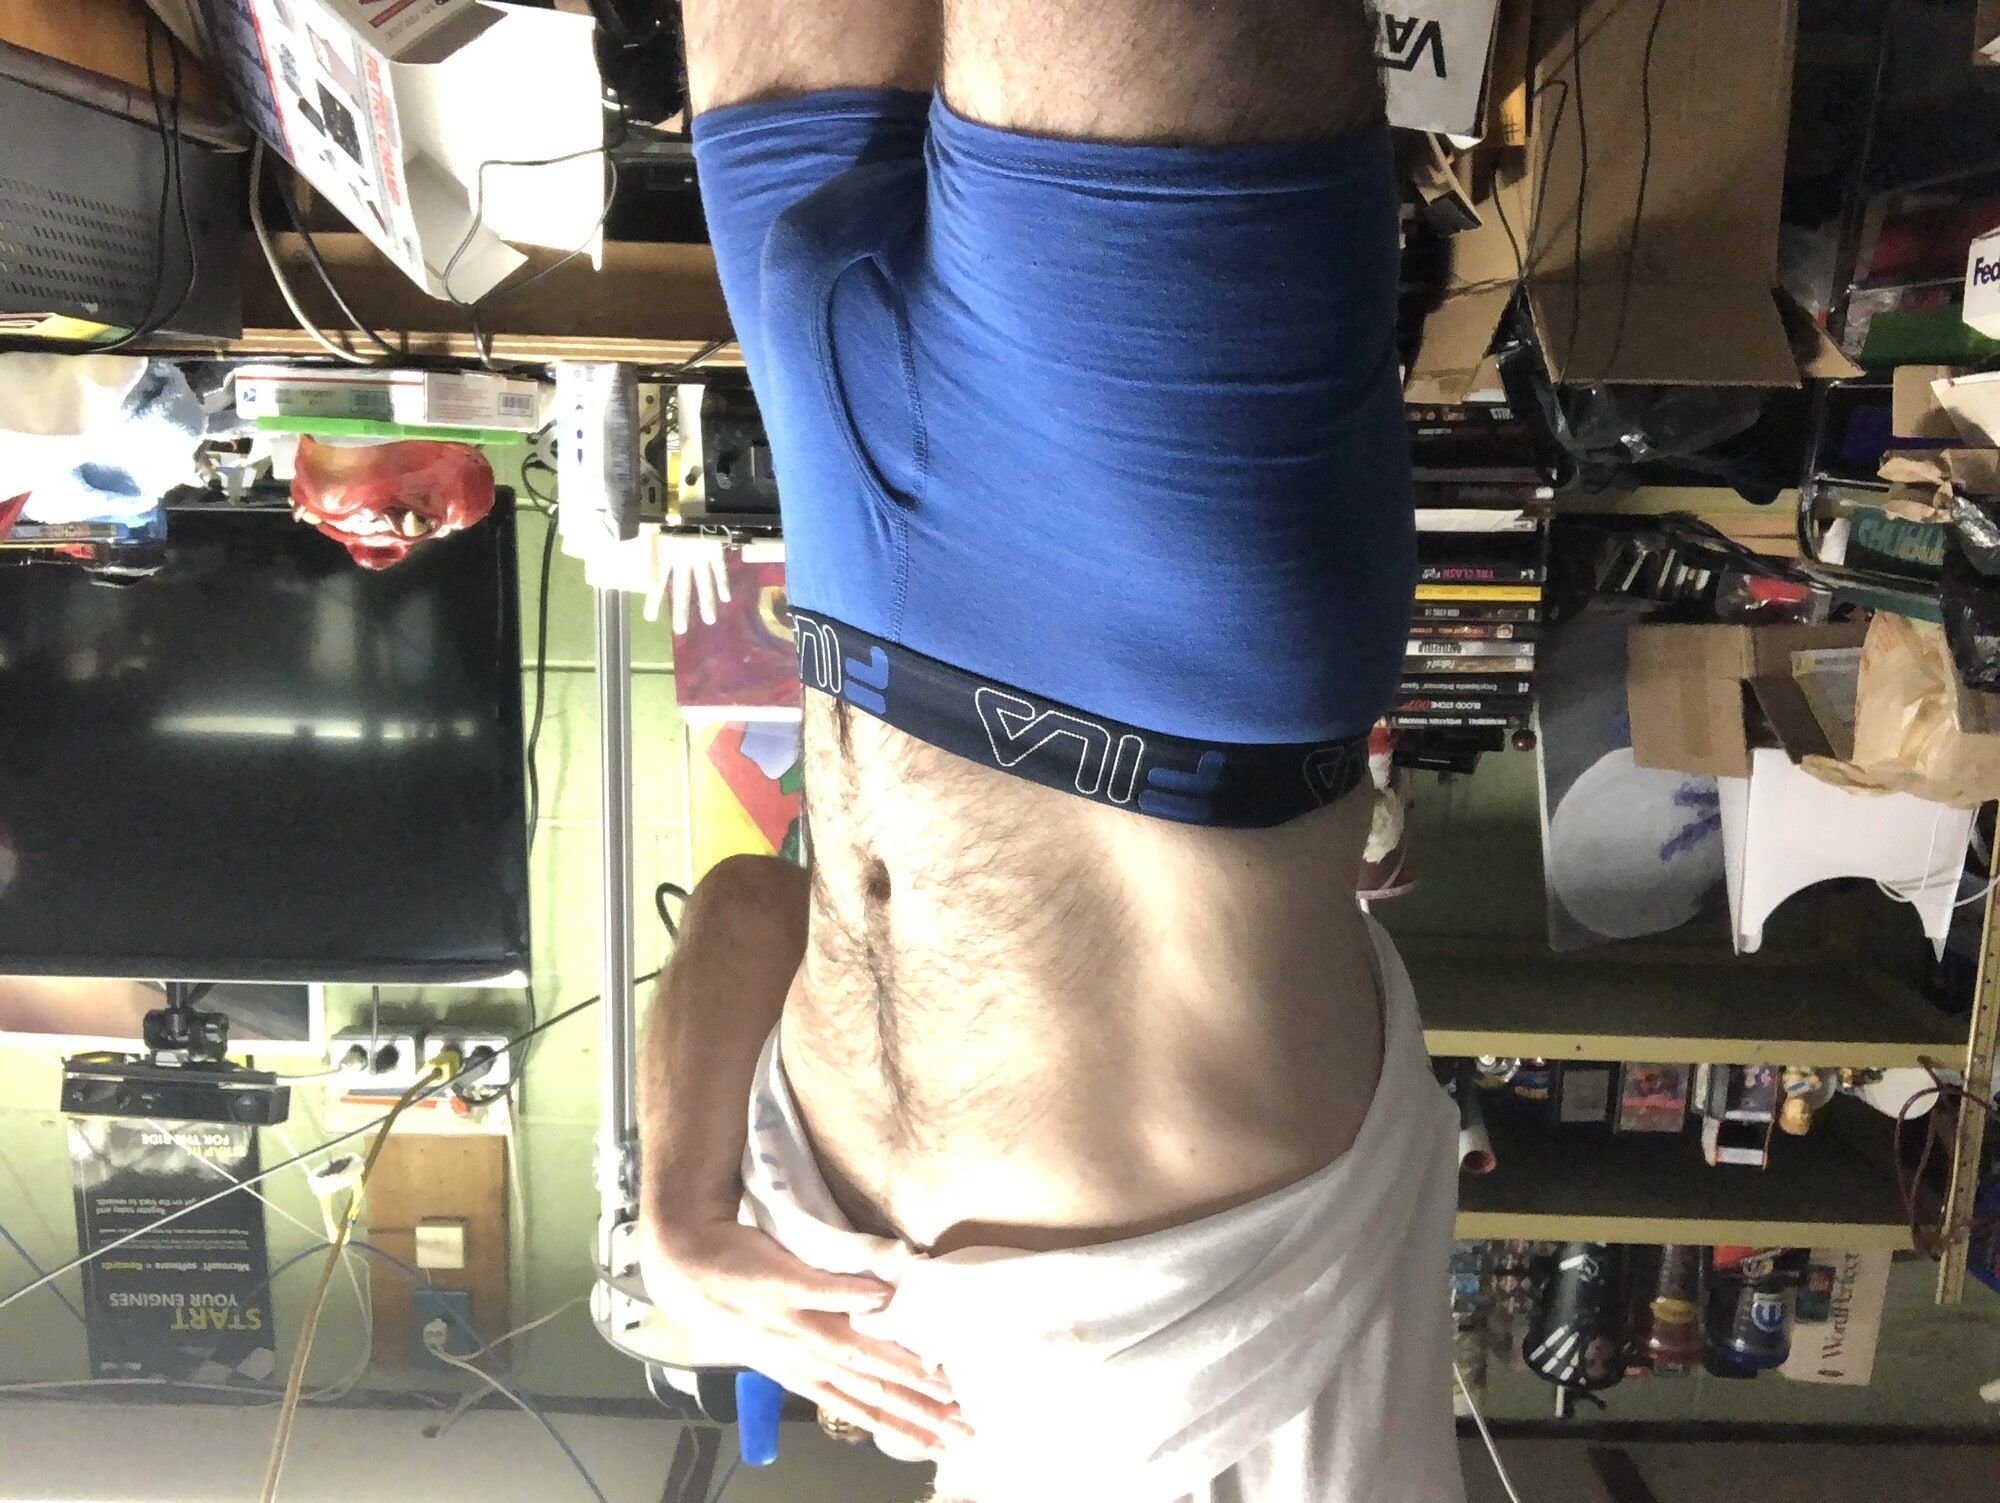 Me in tight blue boxers #3